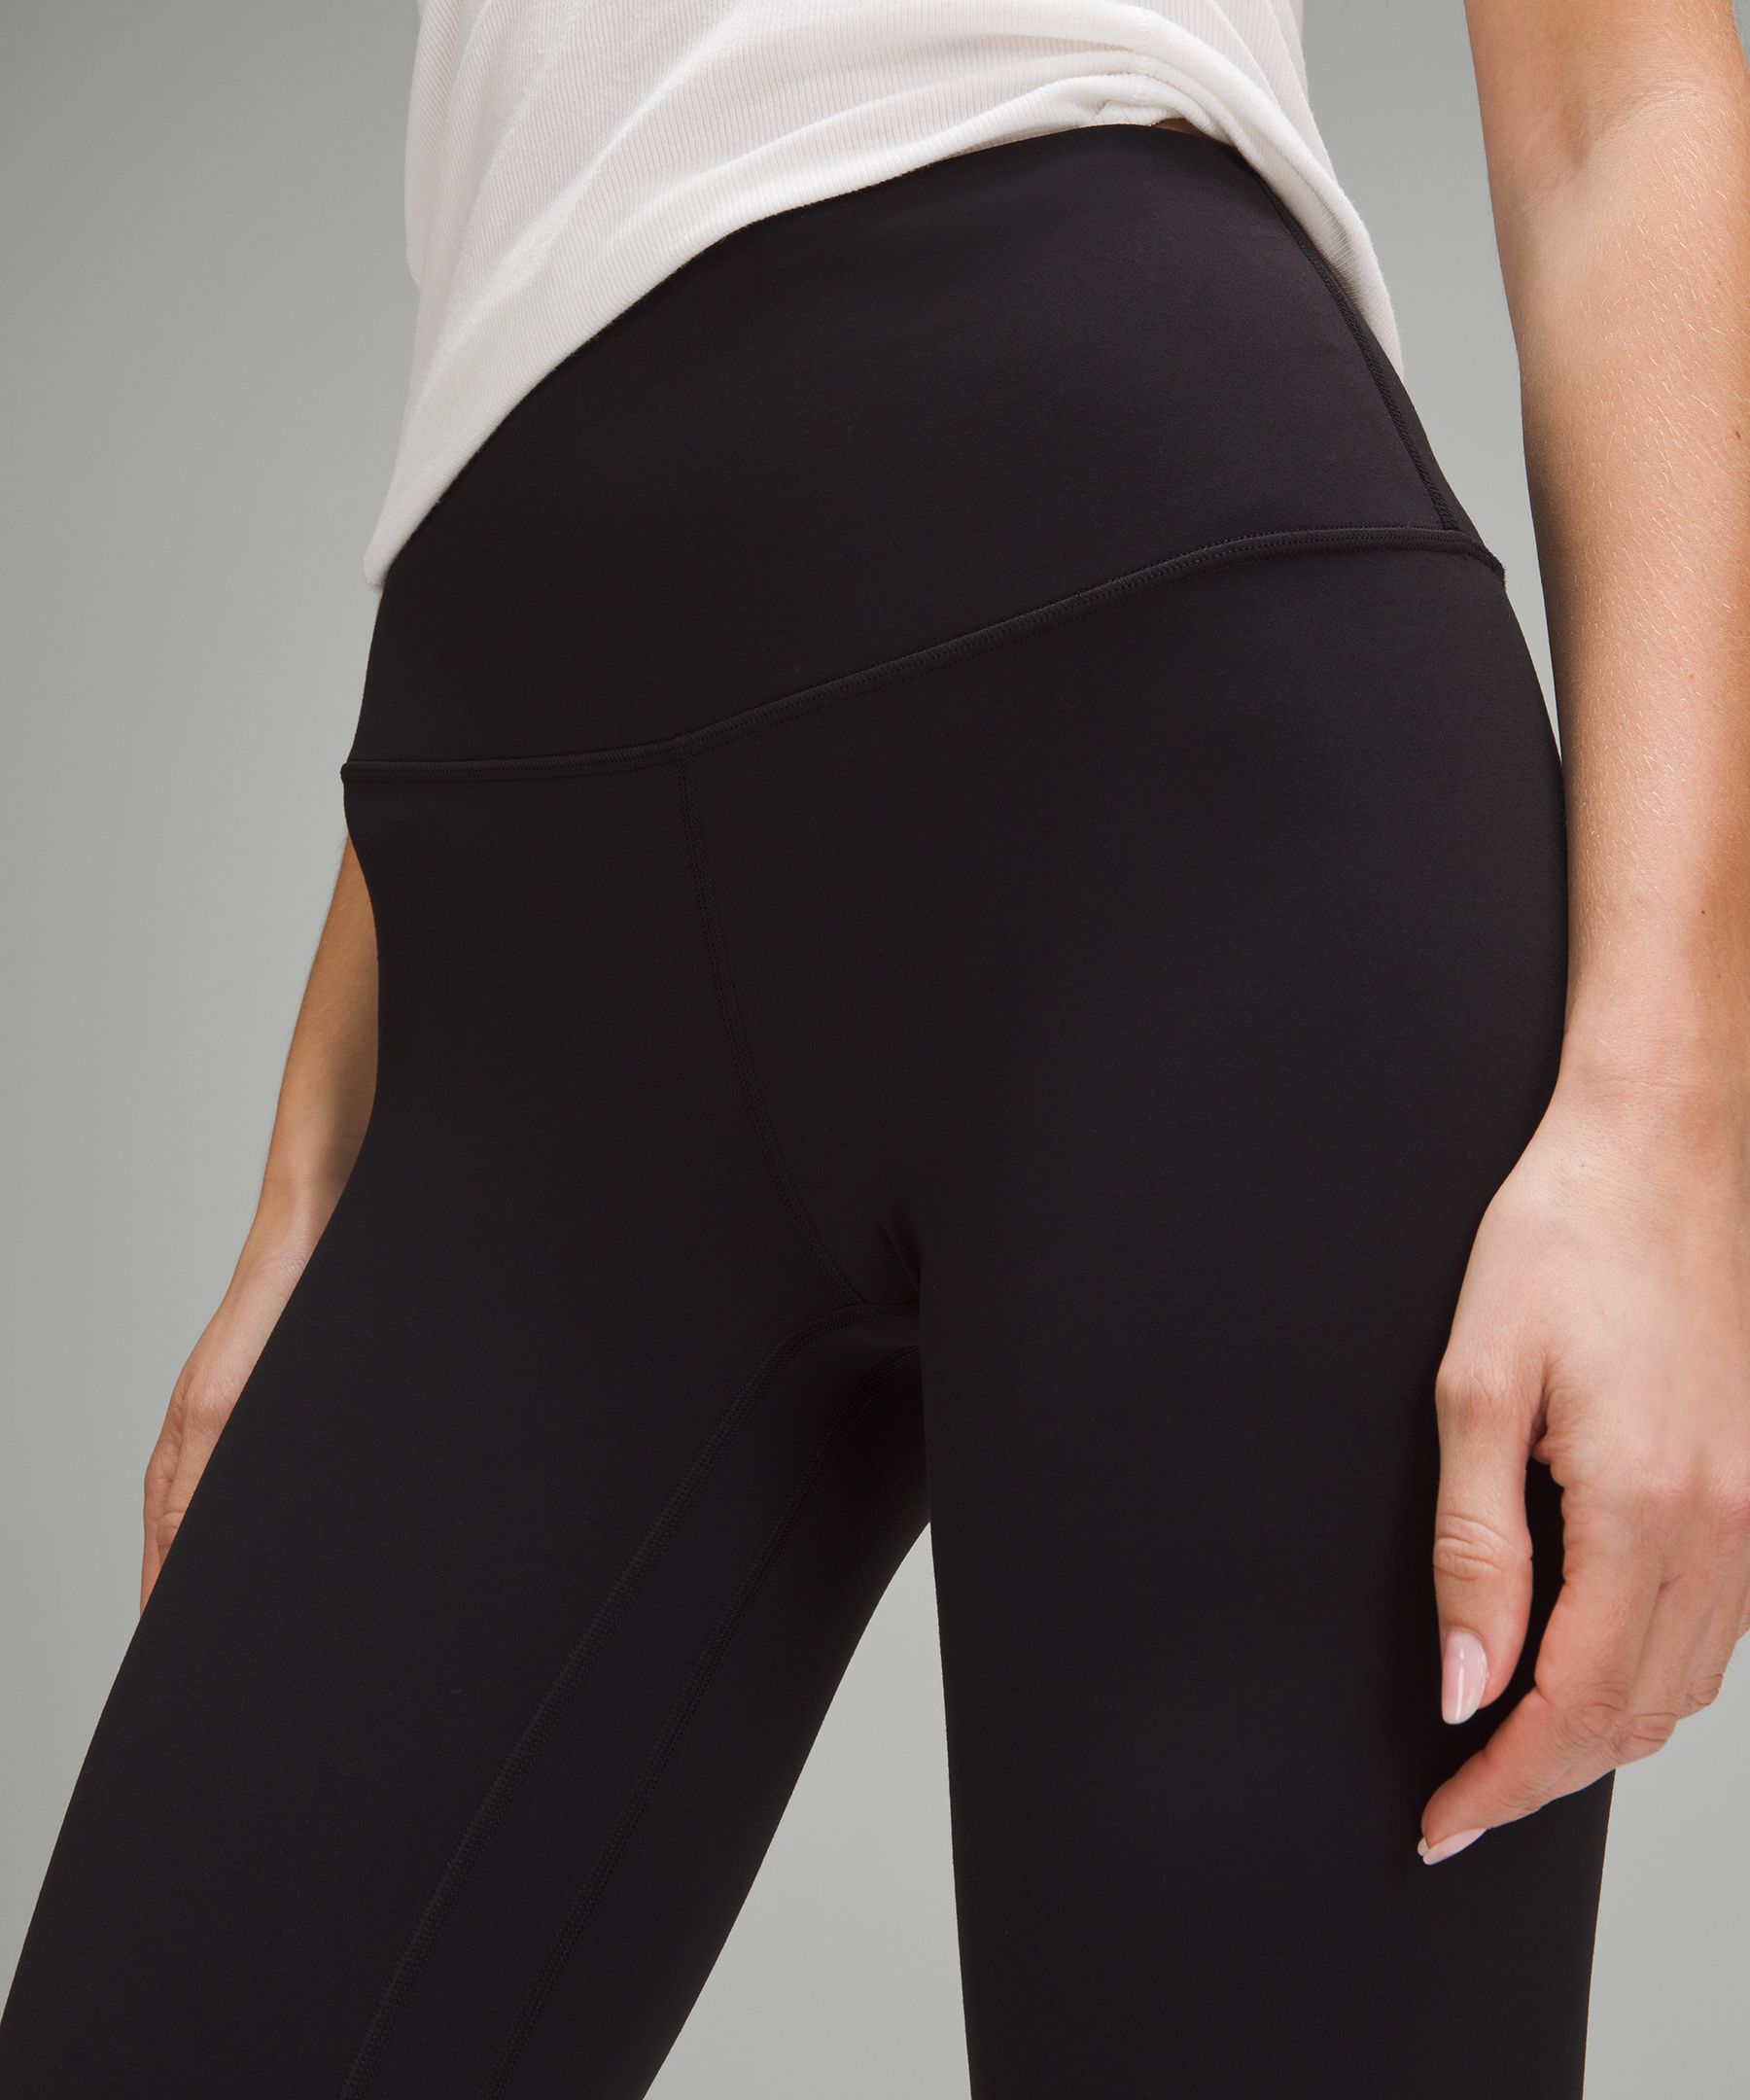 Lululemon Align High-Rise Pant 28 20 Size 20 plus - $93 New With Tags -  From Matilda